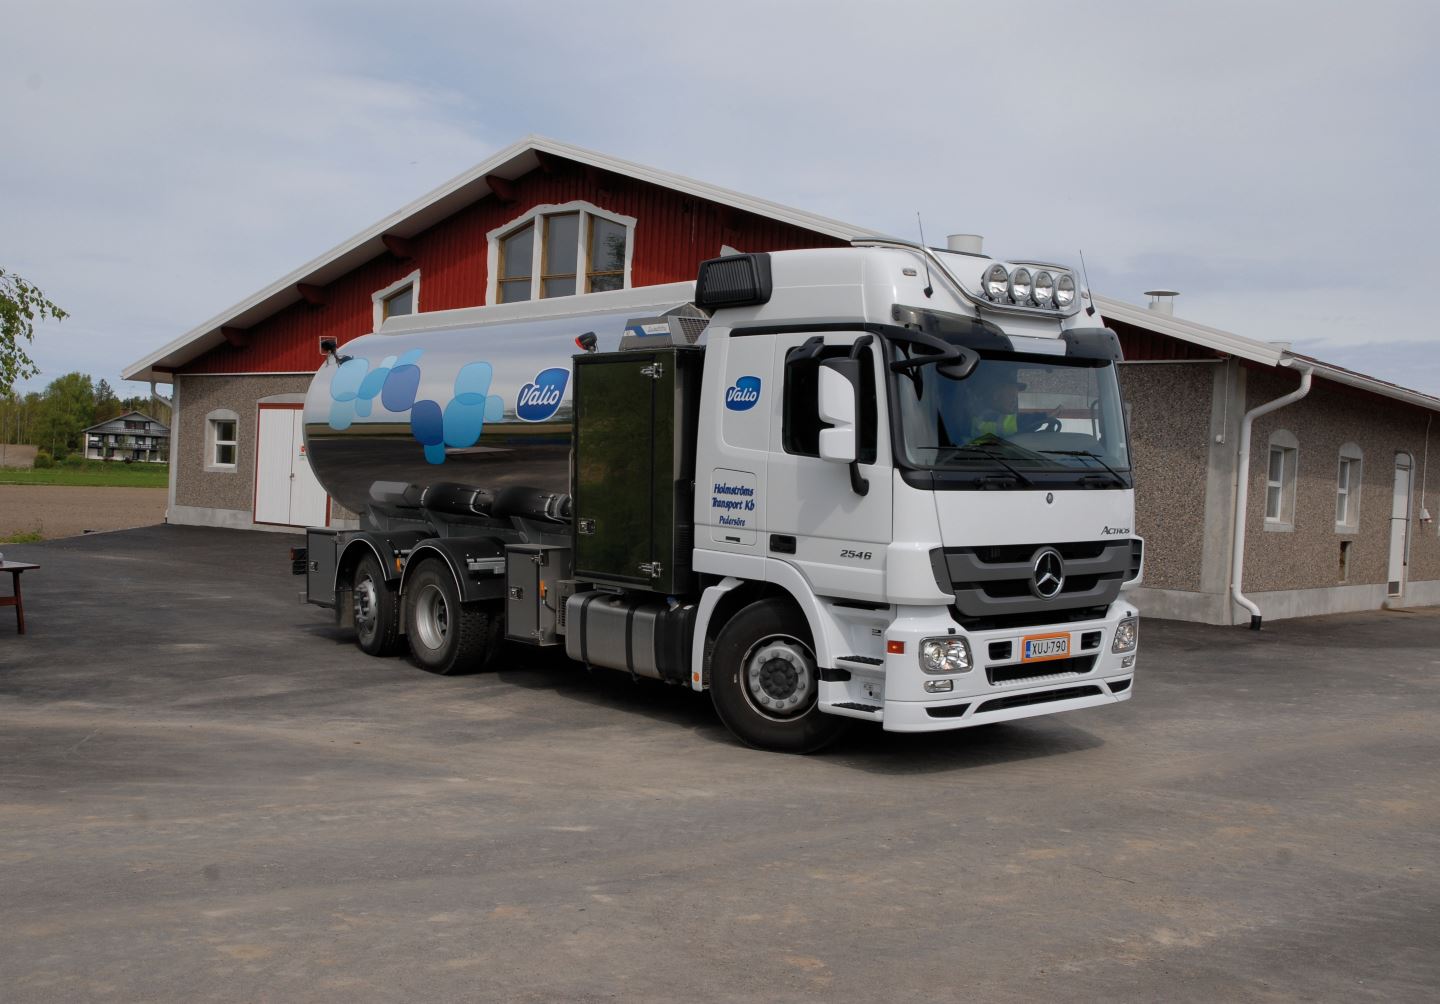 Milk lorry drivers are an important link in the quality chain